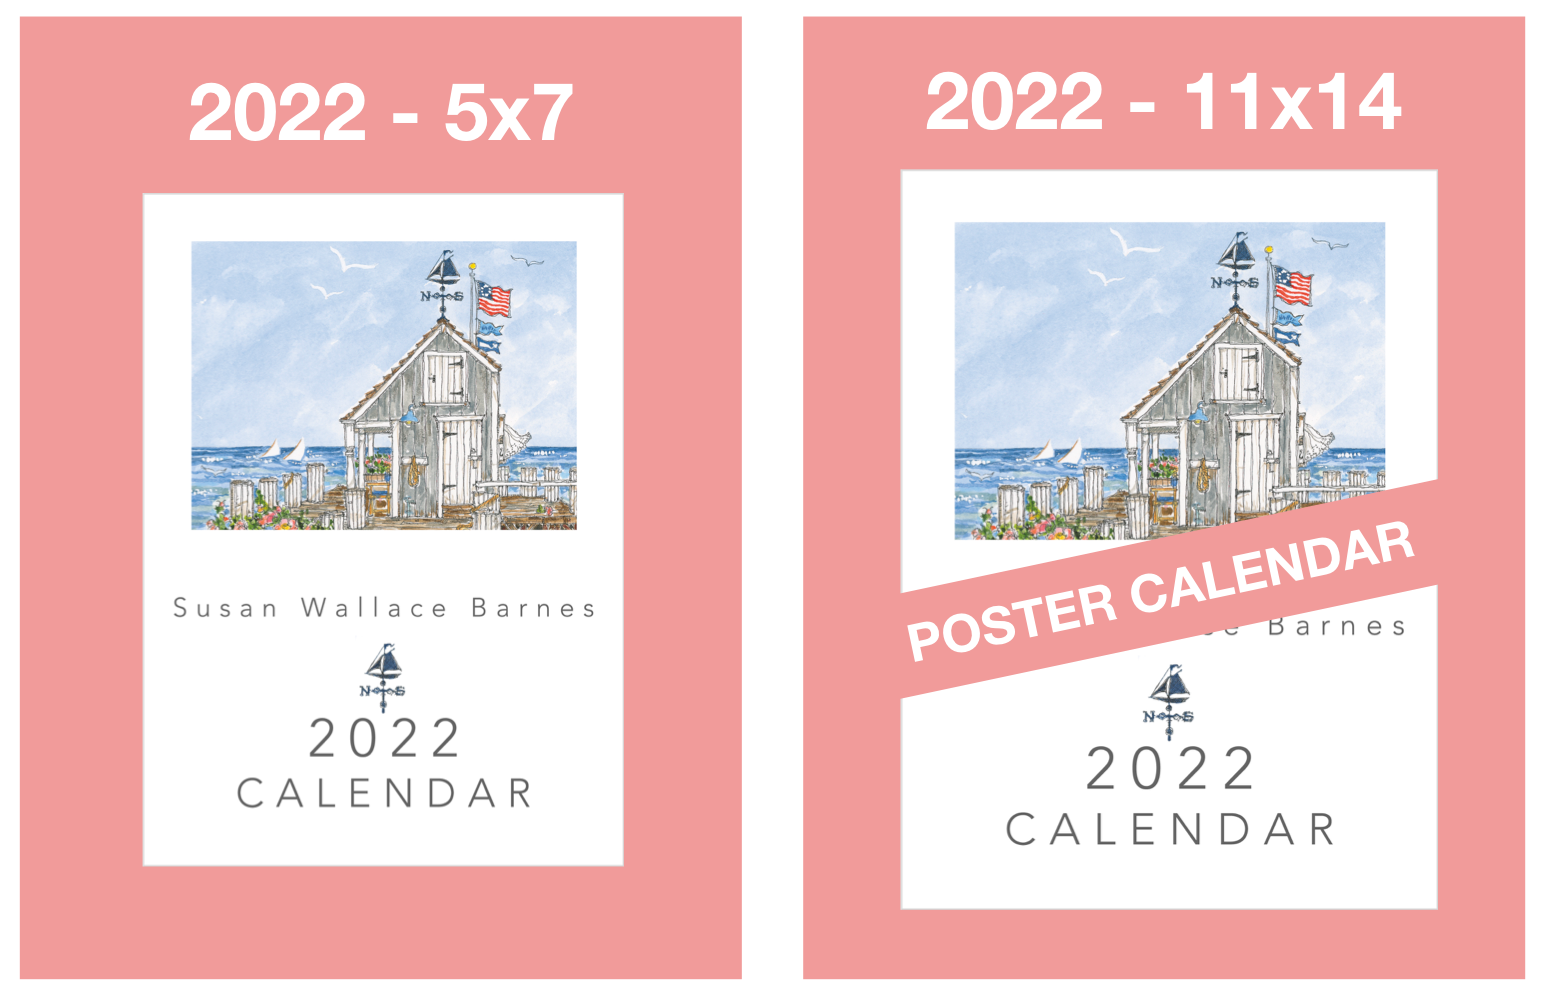 NEW 2022 SWB CALENDAR COLLECTIONS NOW AVAILABLE! SUSAN WALLACE BARNES